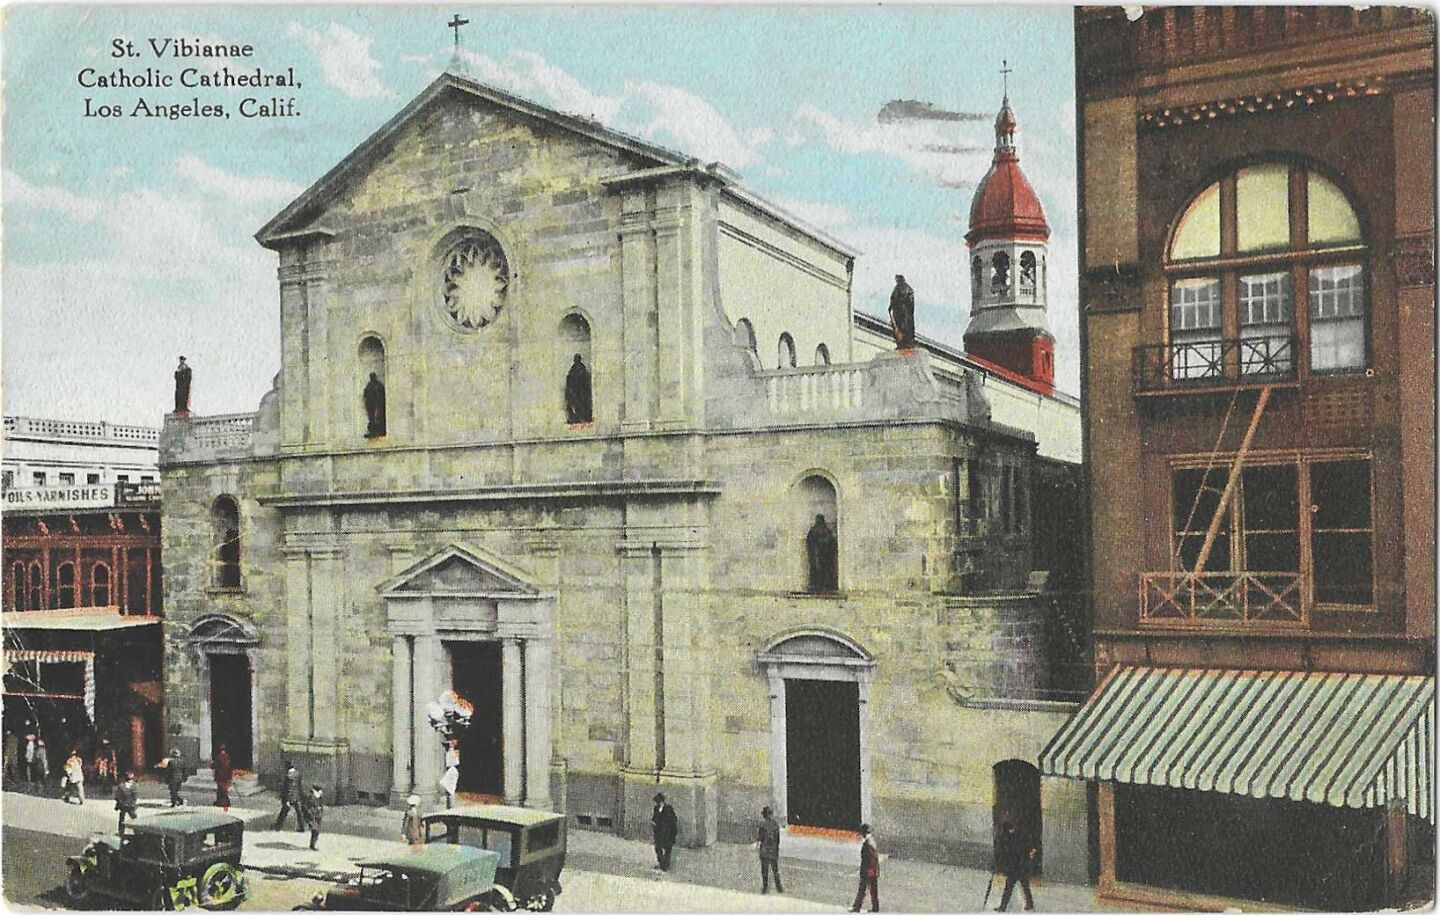 Built in 1876, the centennial anniversary of the United States, St. Vibiana’s was the cathedral for this Roman Catholic outpost, a town of fewer than 10,000 people. For decades, the relics of Vibiana, whose tomb was found in Roman catacombs with inscriptions suggesting she died a martyr and a virgin, were on display above the altar. The church is seen here on a postcard with a 1924 postmark.